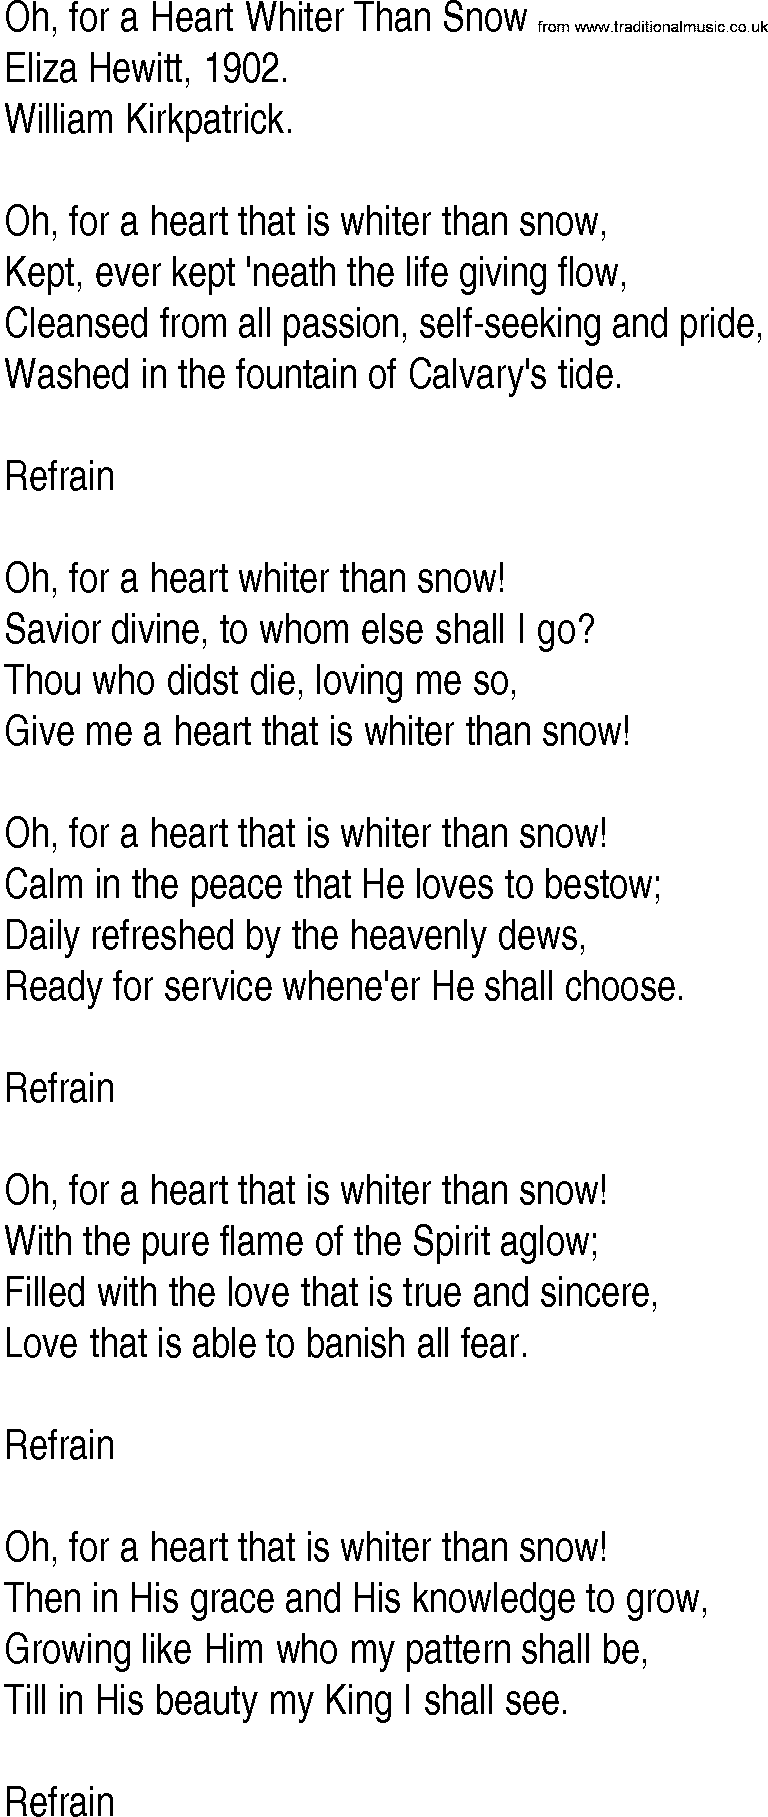 Hymn and Gospel Song: Oh, for a Heart Whiter Than Snow by Eliza Hewitt lyrics